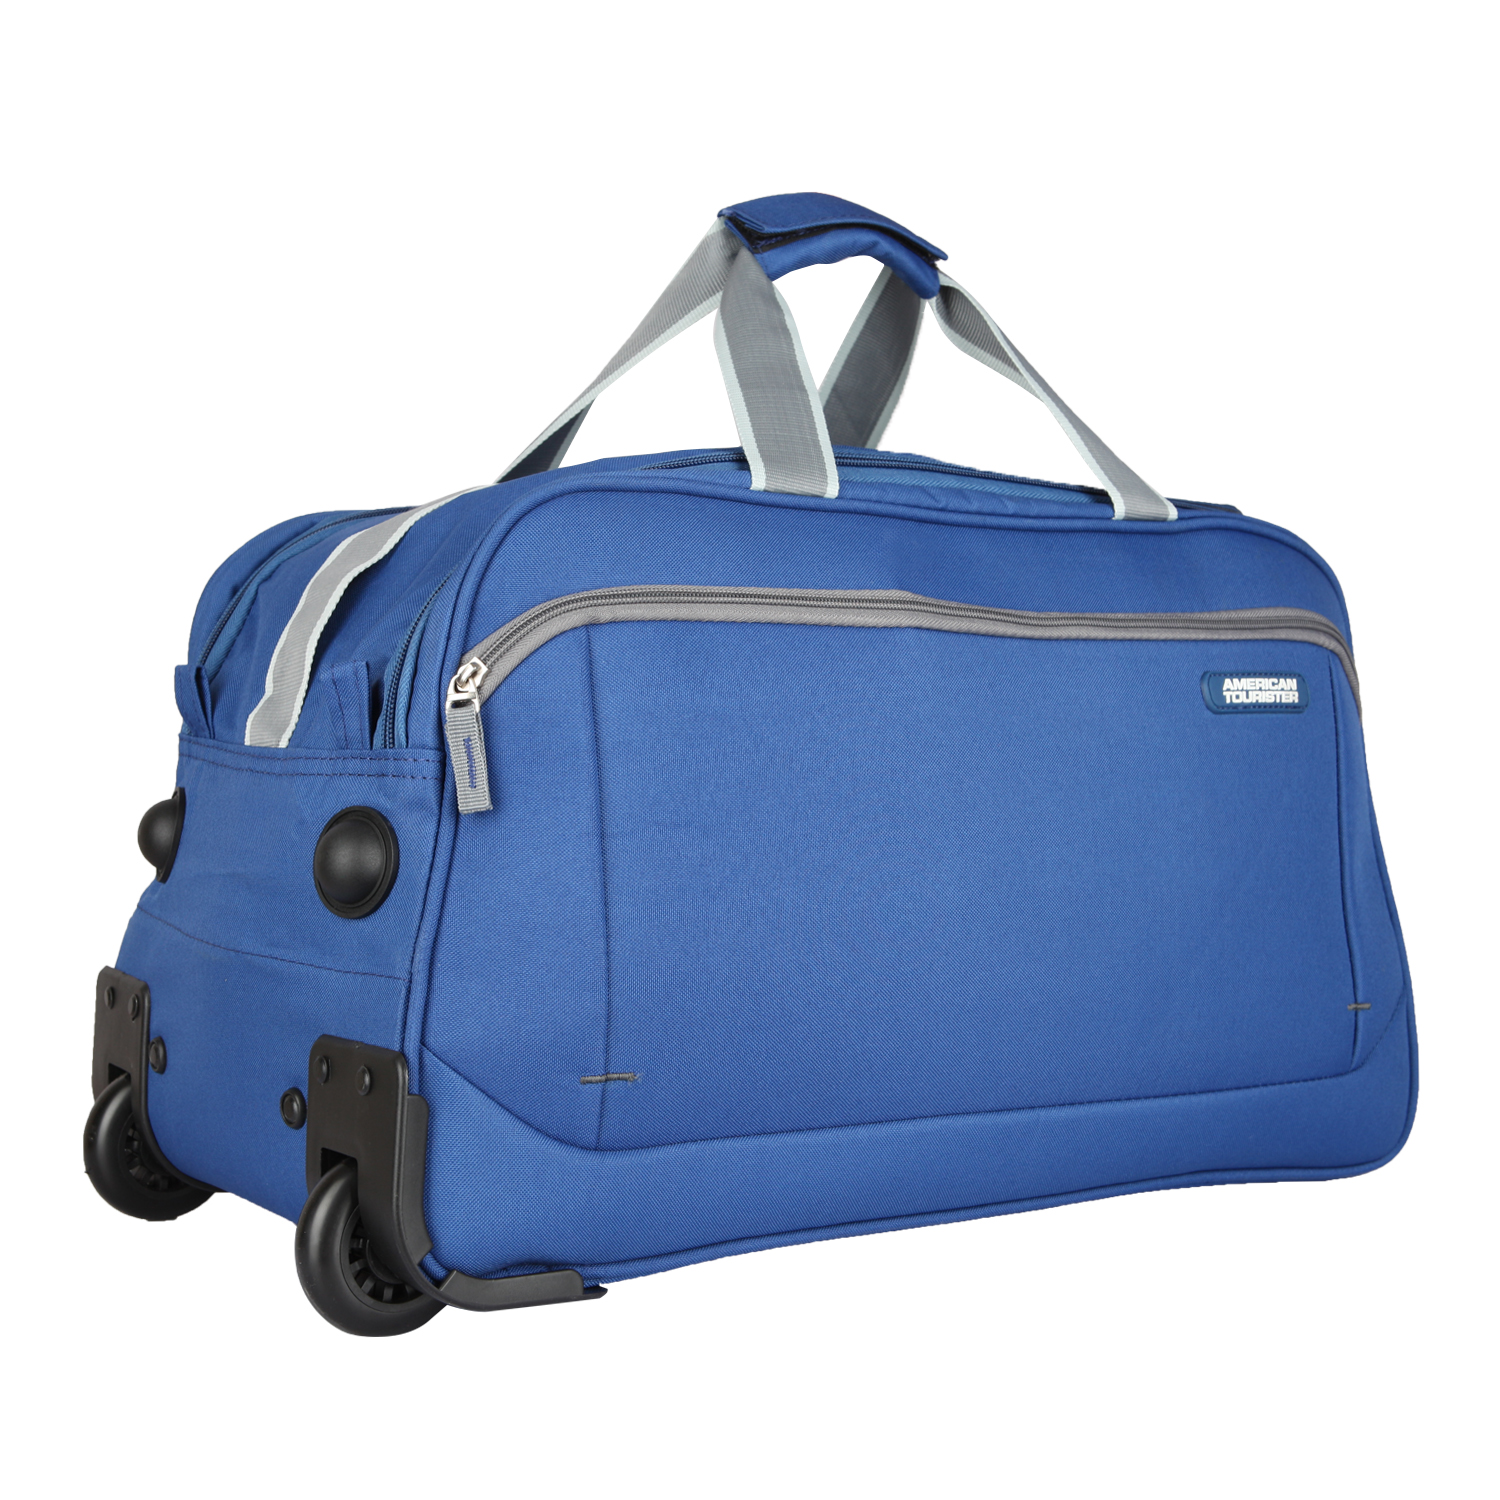 American Tourister Trolley Bag Size Chart